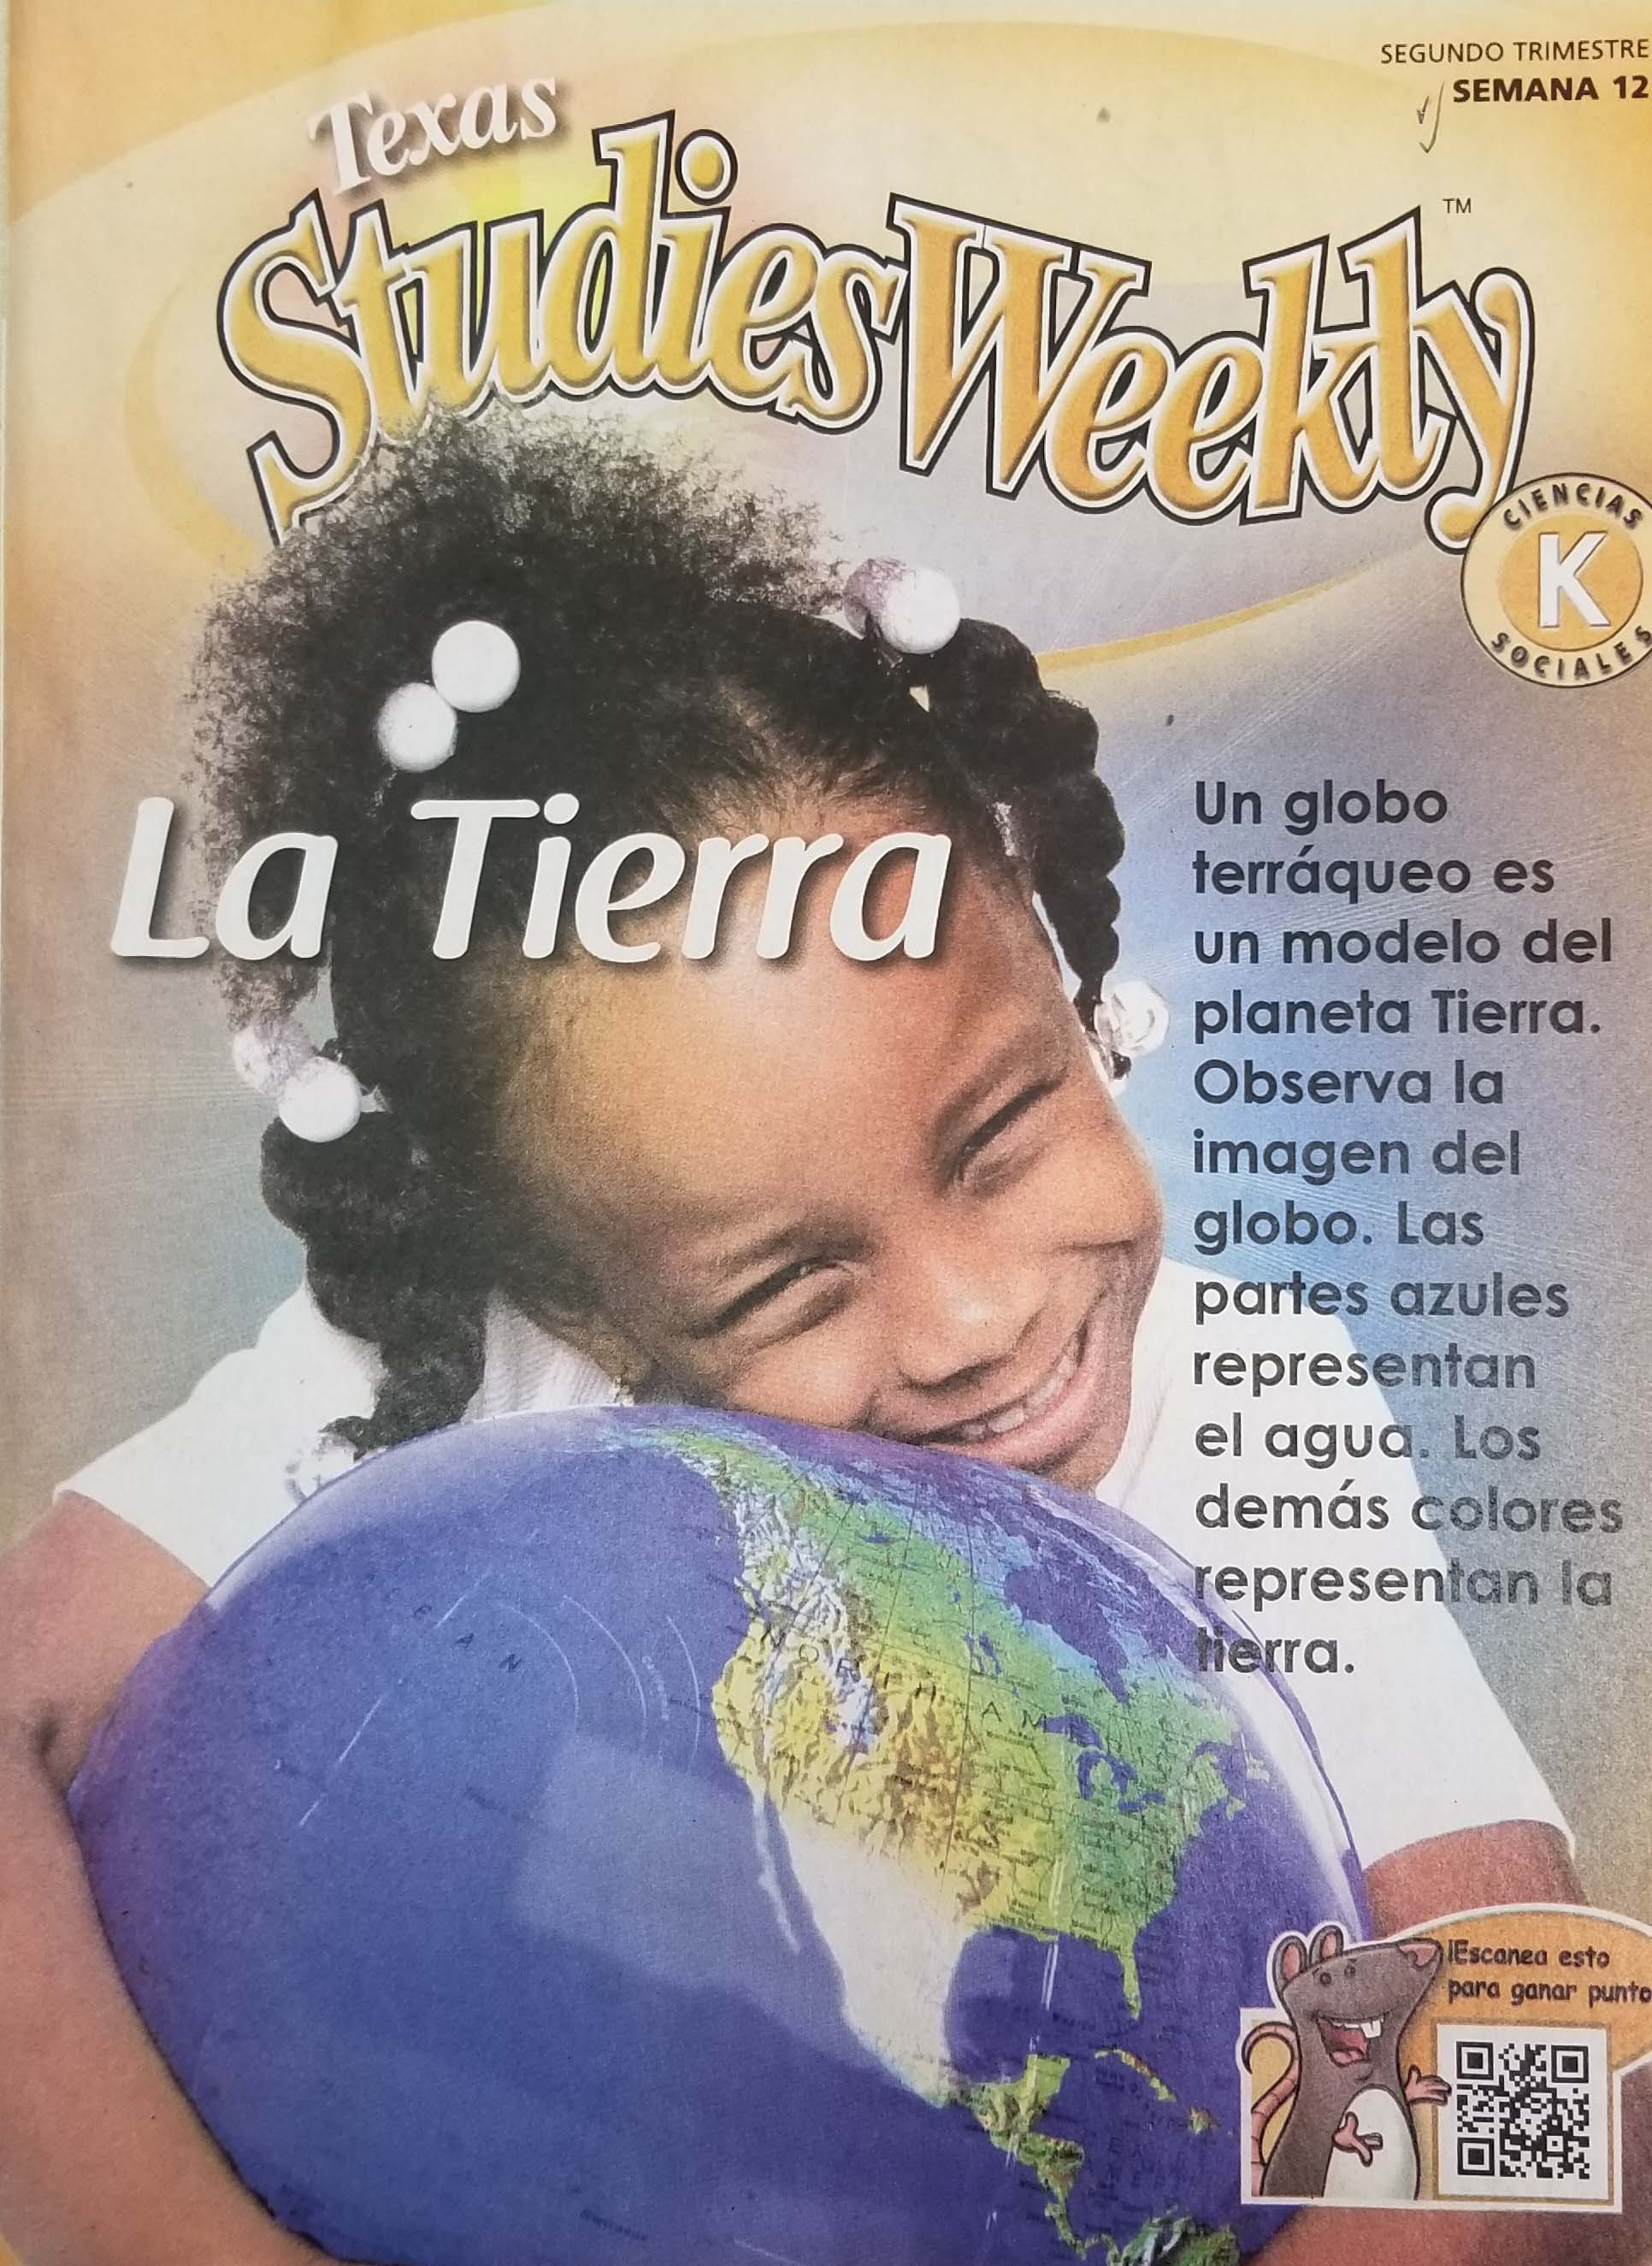 Spanish-language Weekly Reader cover showing kindergarten girl smiling her biggest smile while hugging an inflatable globe of the world; the topic of this Weekly Reader is The Earth.